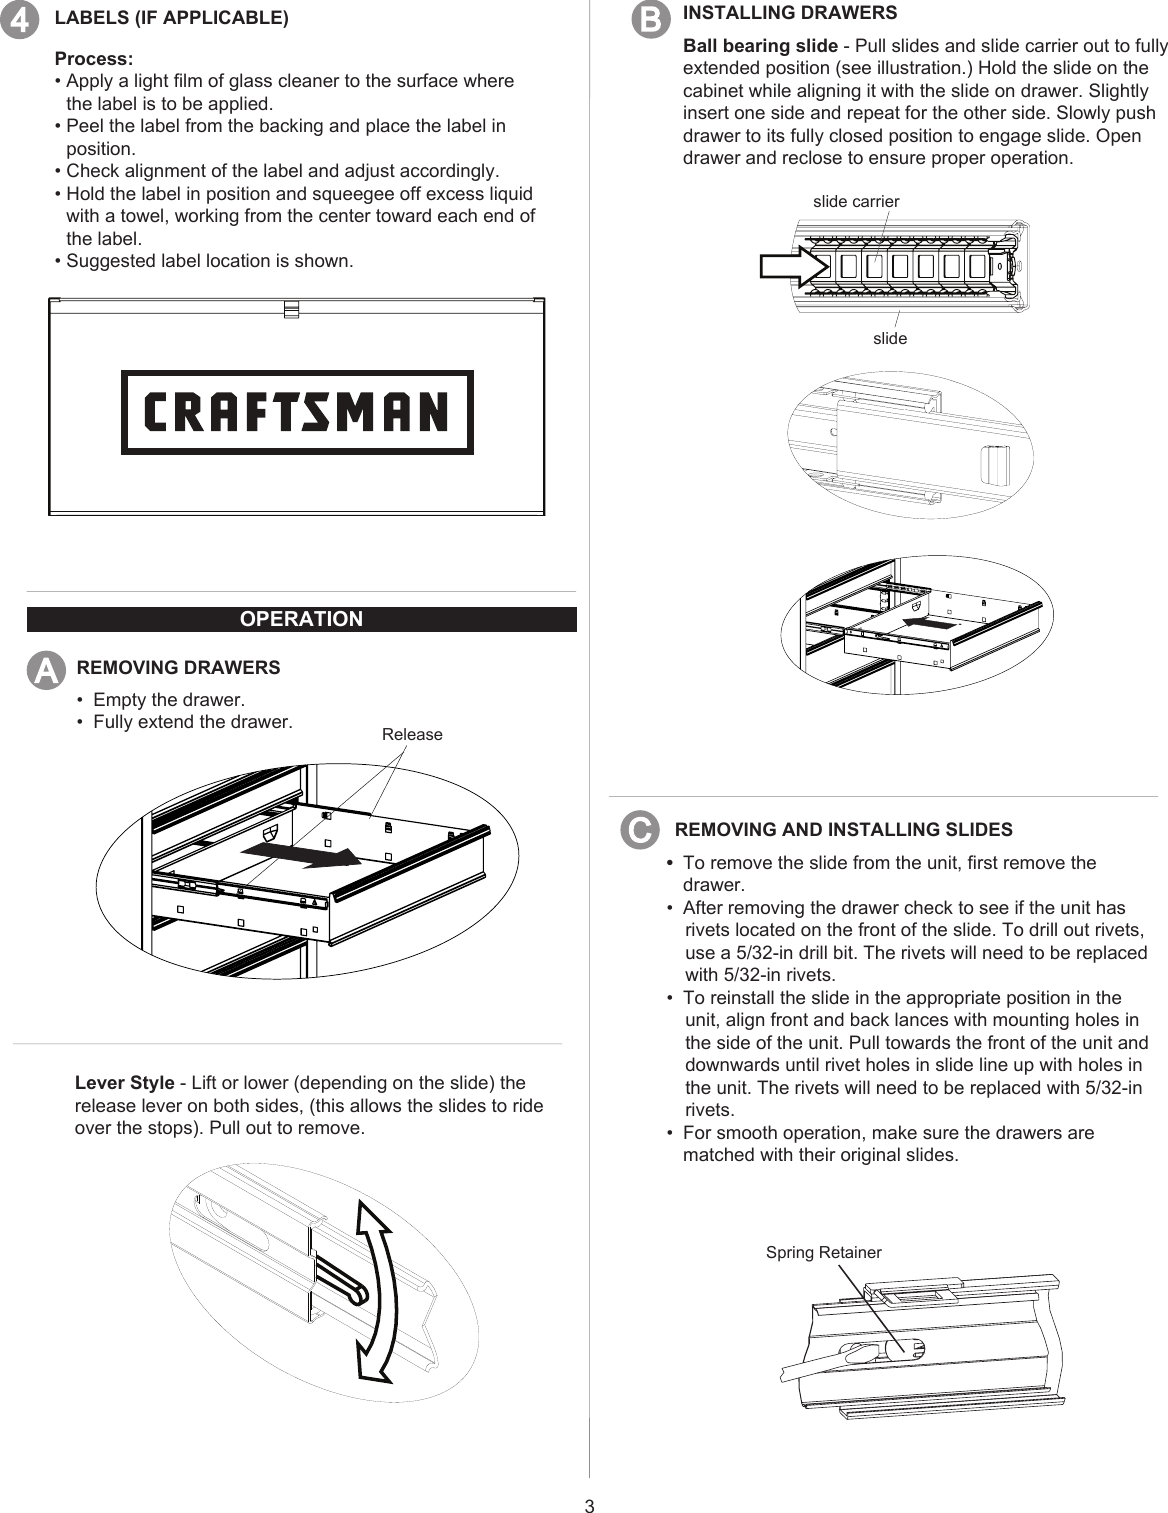 Page 3 of 8 - Craftsman Craftsman-26-In-4-Drawer-Ball-Bearing-Griplatch-Rolling-Cabinet-Red-Owners-Manual-  Craftsman-26-in-4-drawer-ball-bearing-griplatch-rolling-cabinet-red-owners-manual